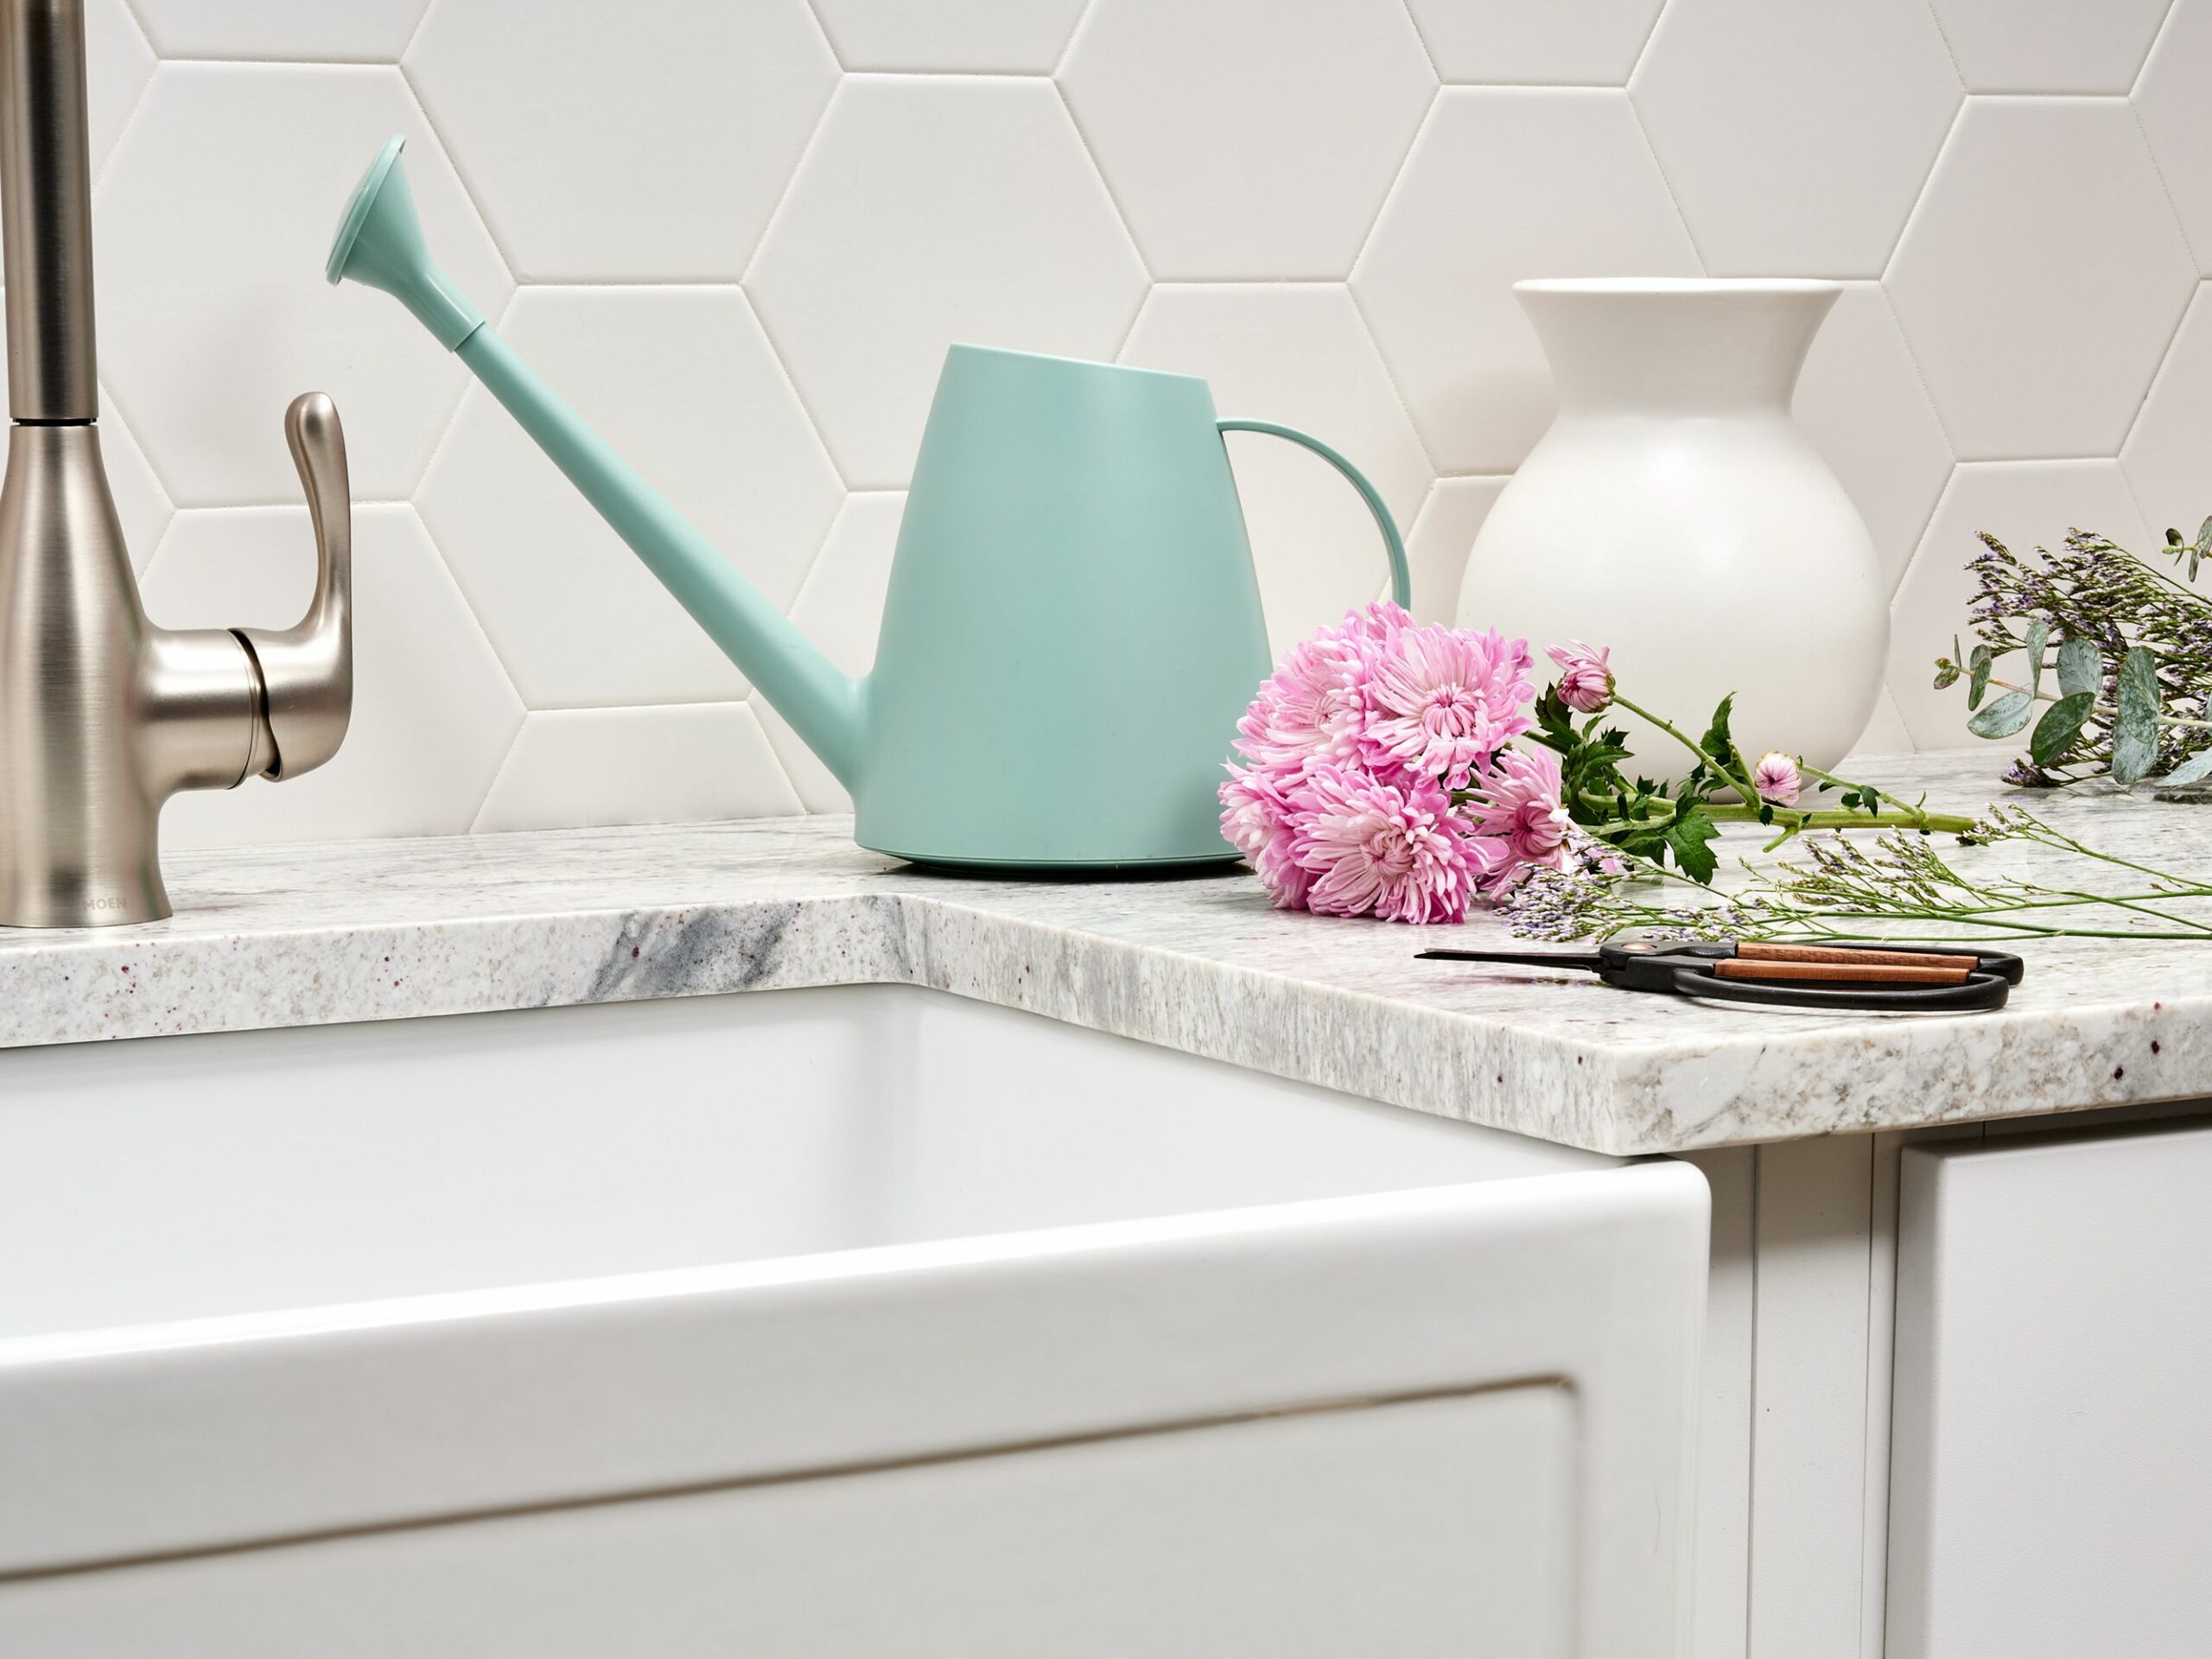 What is a standard size undermount sink?